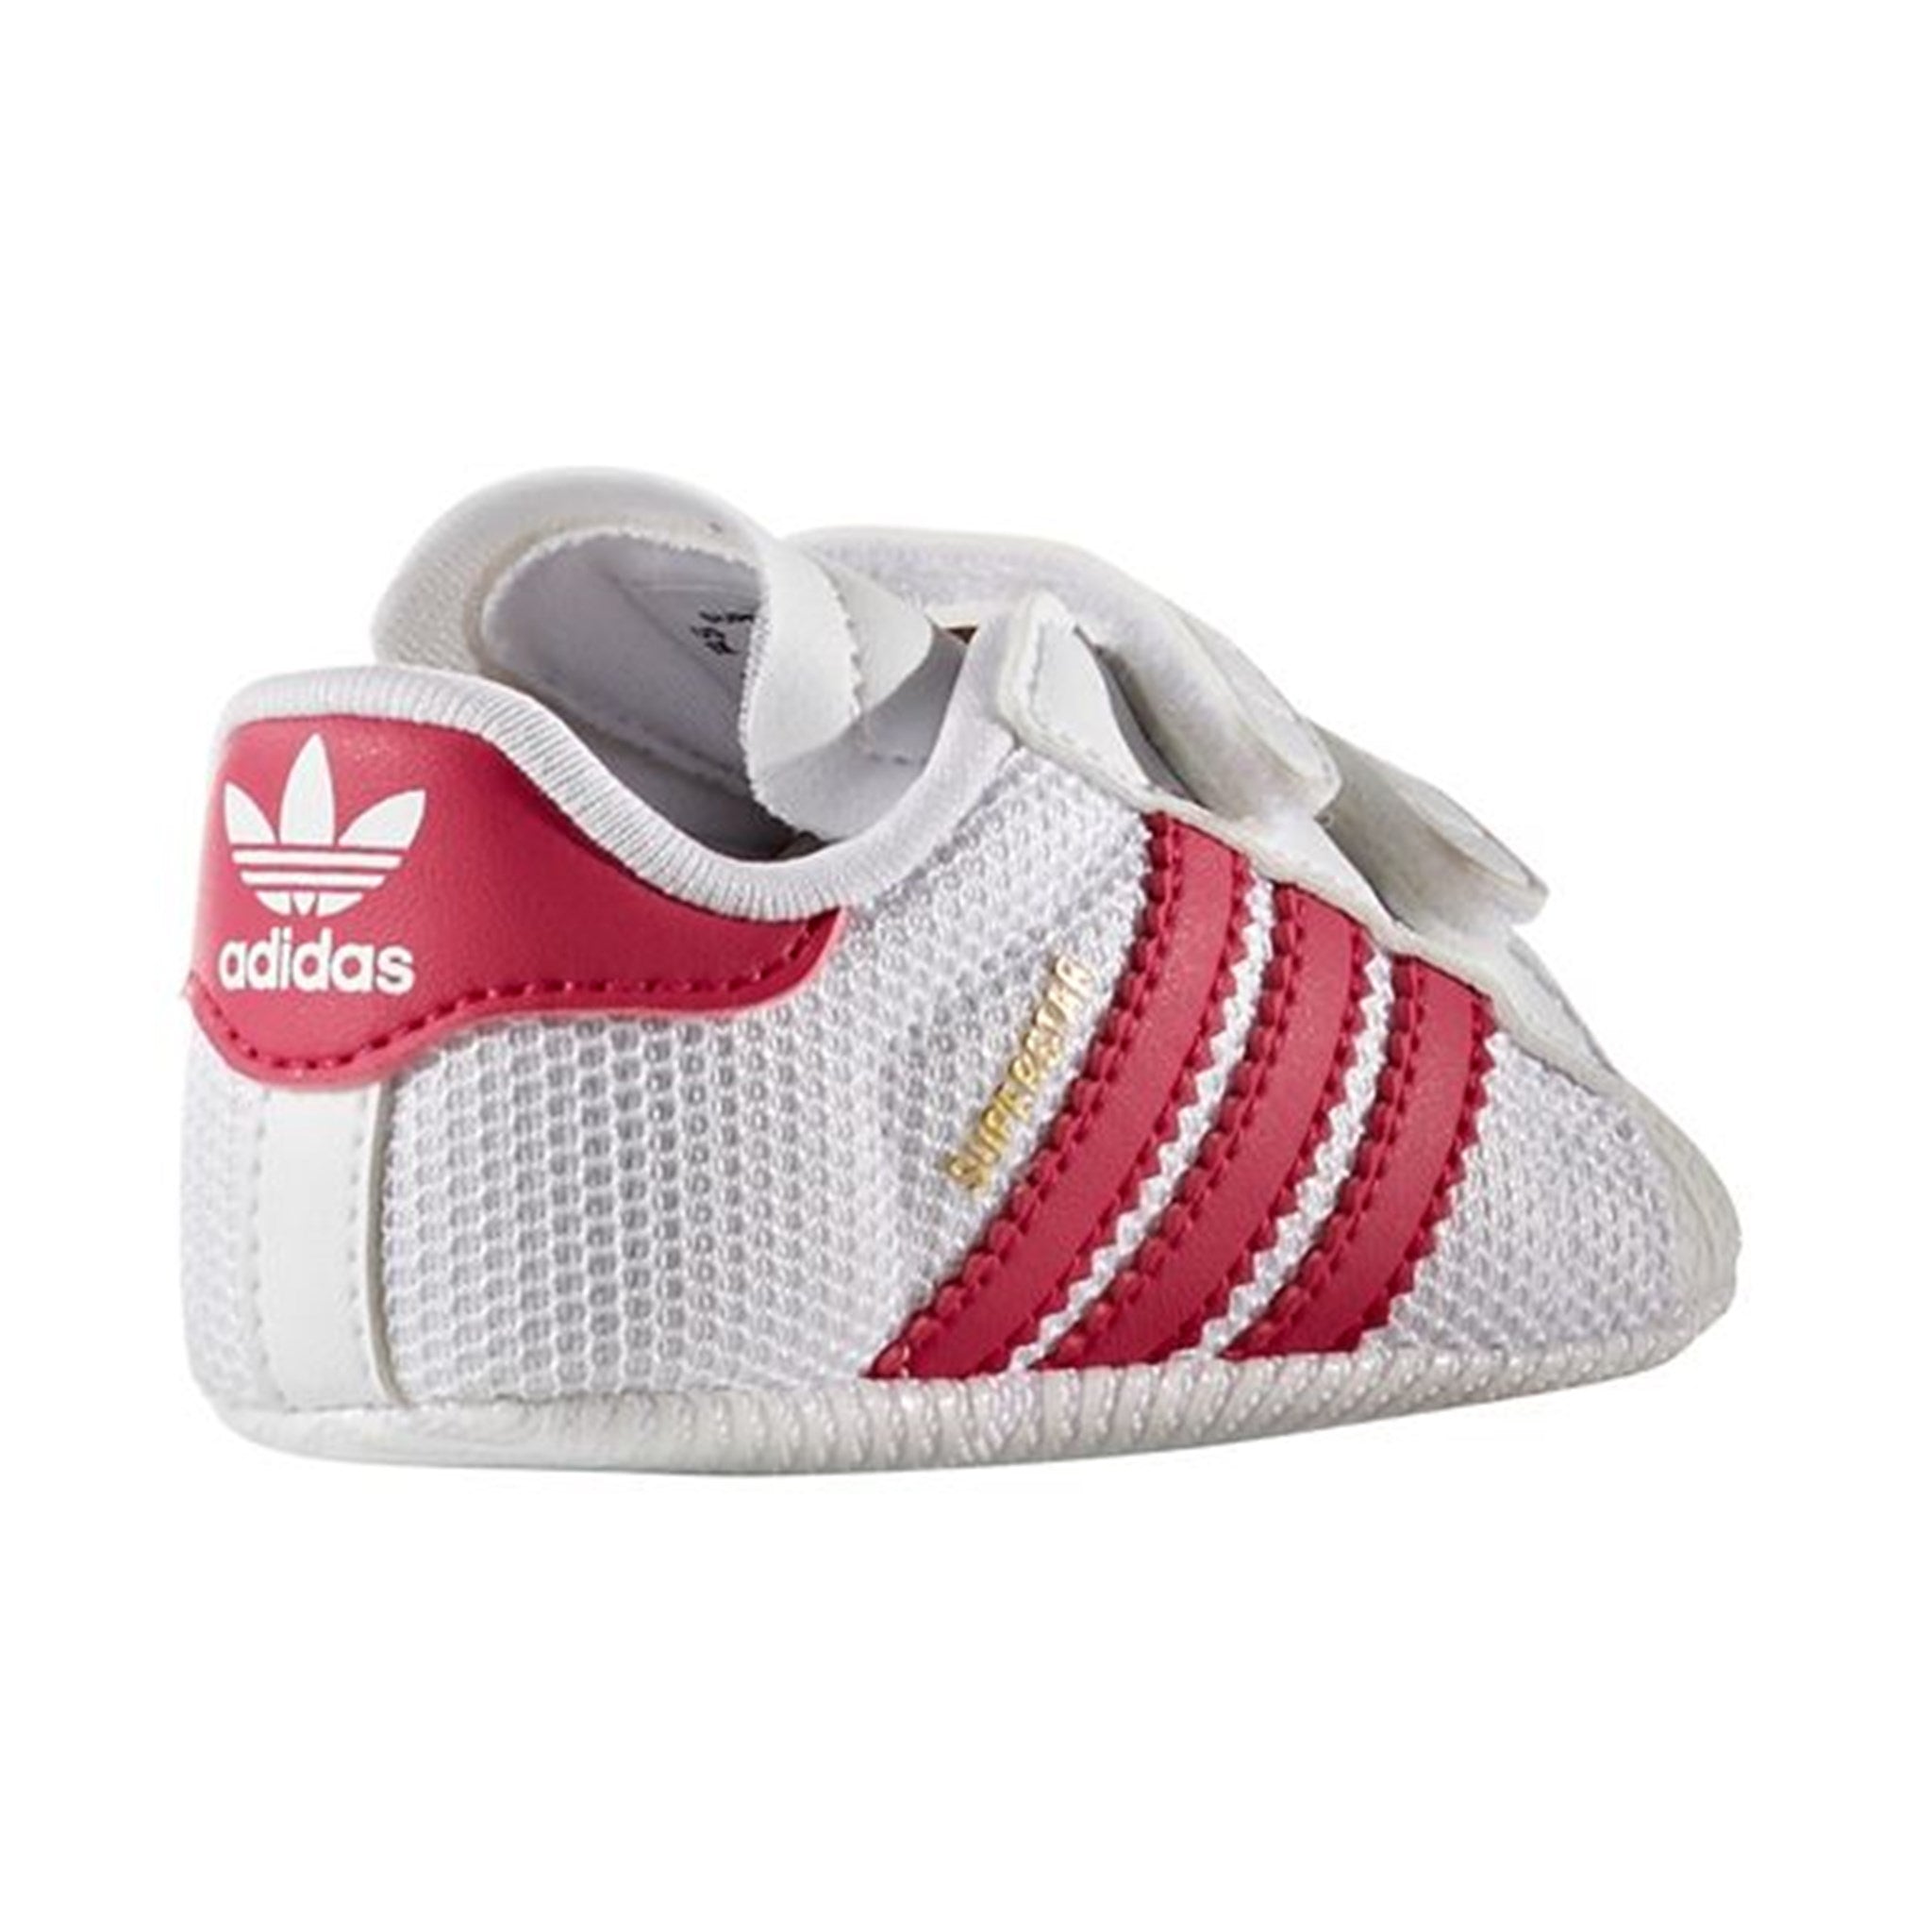 adidas Superstar Sneakers White/Pink S79917 2